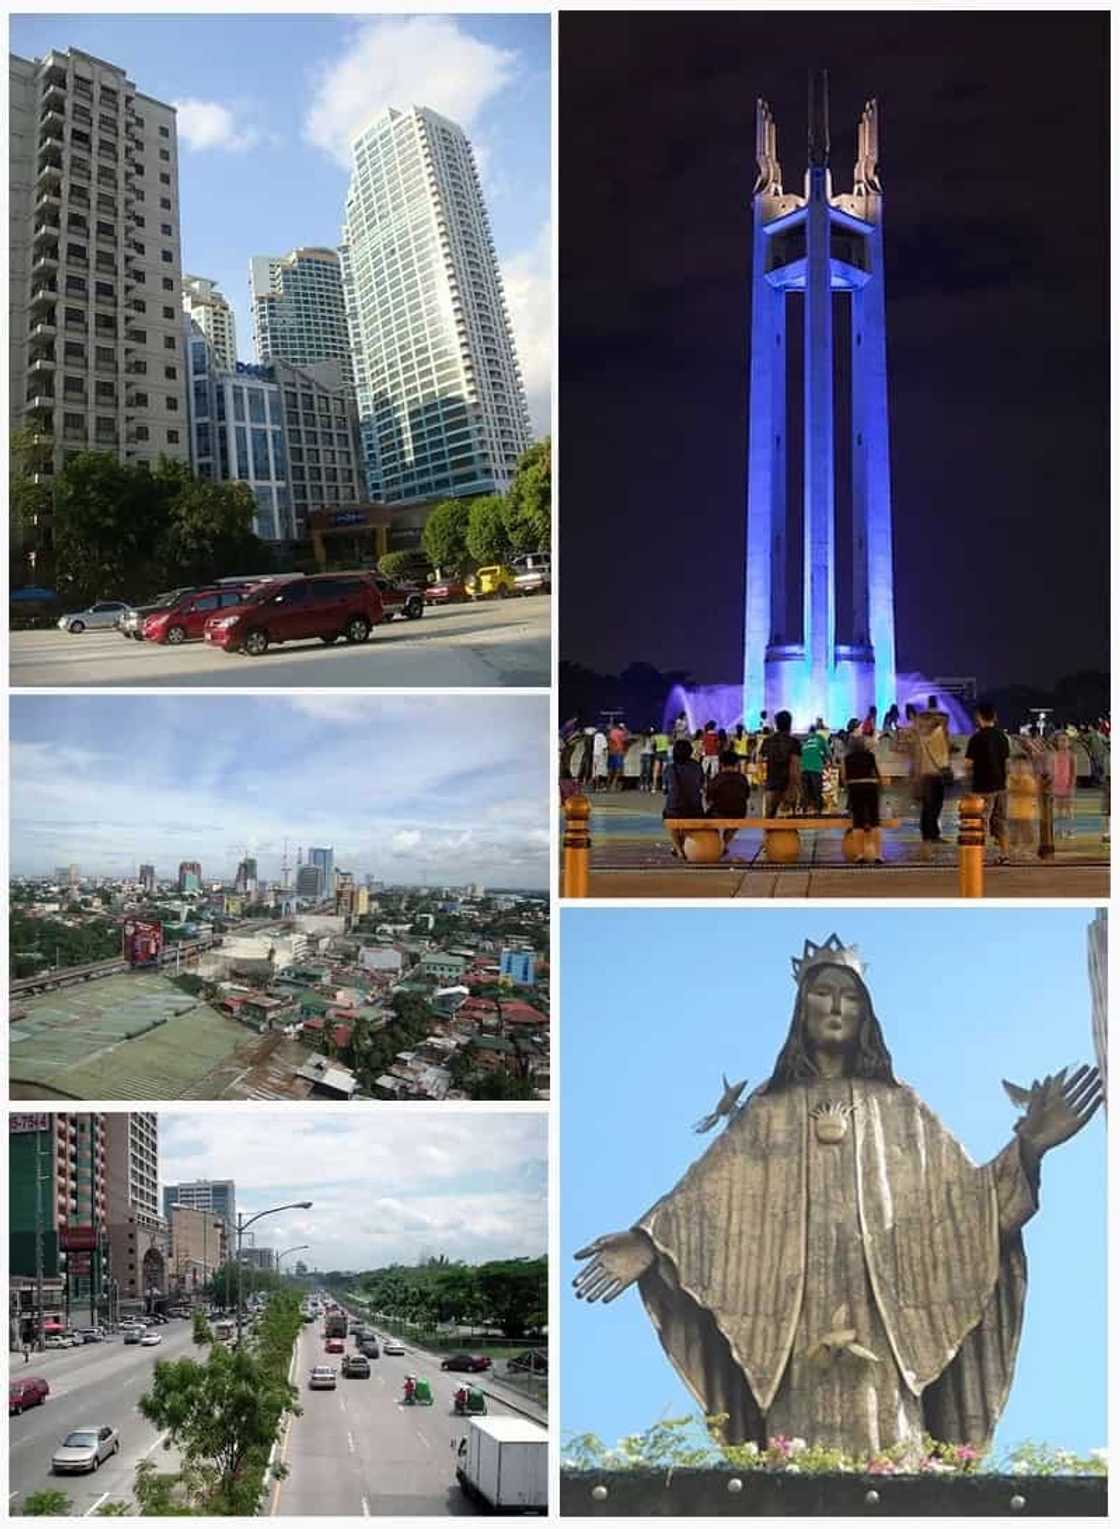 Quezon City Most Unsafe To Live In?